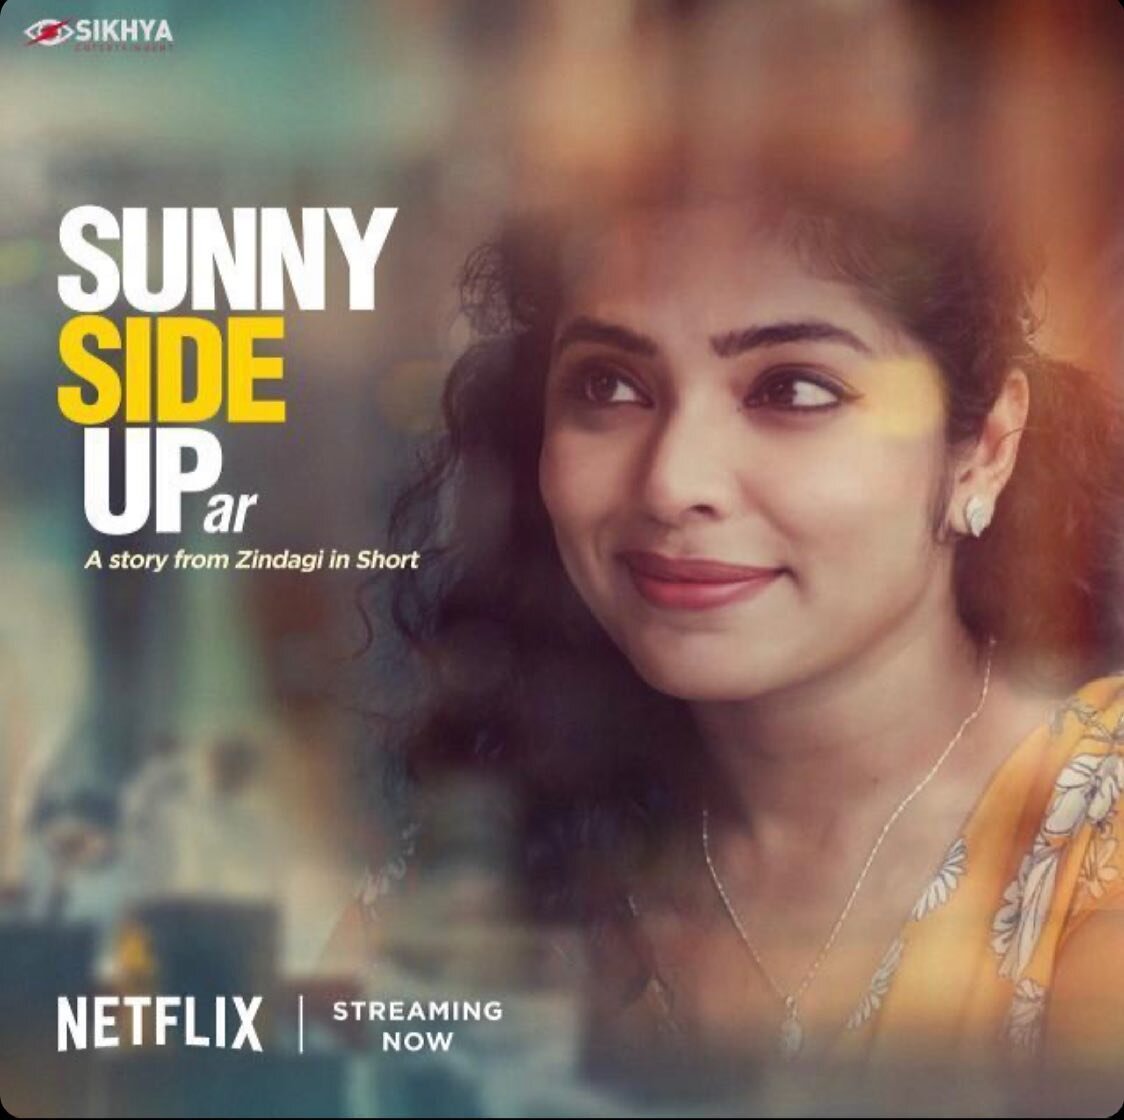 Check out this sweet short film directed by @sacredinsanity starring @rimakallingal and @nakuulmehta with my song Lovely at the end of the film.  Sunny Side Upar is a part of Zindagi In Short screening on @netflix @netflix_in @sikhya @guneetmonga 
Th